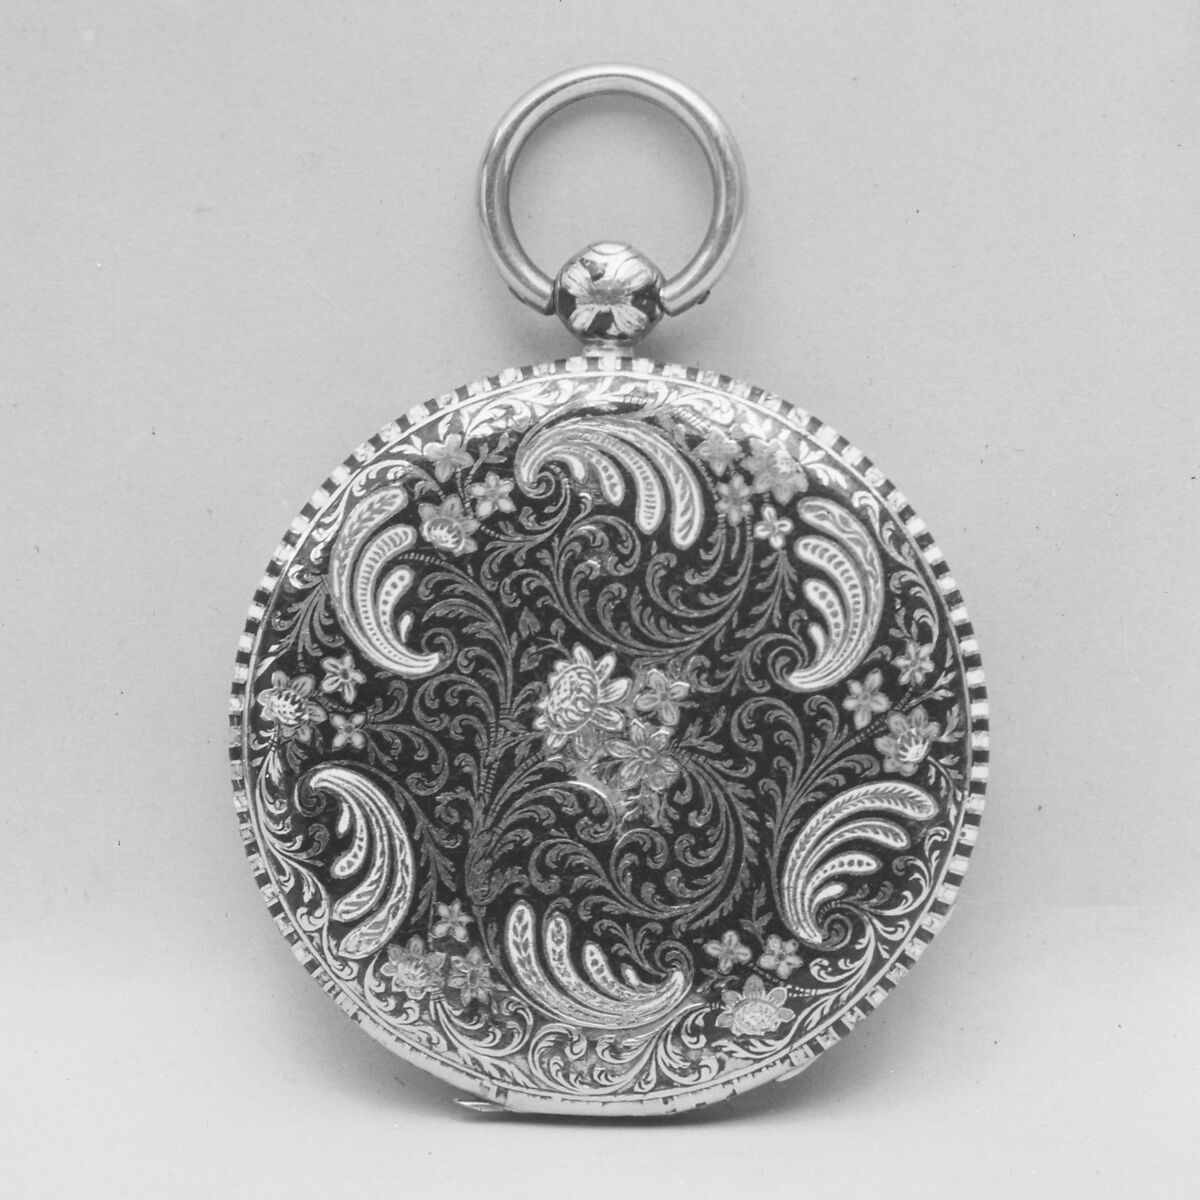 Watch, Firm of Lépine  French, Gold, engine-turned silver, niello, champlevé enamel, French, Paris